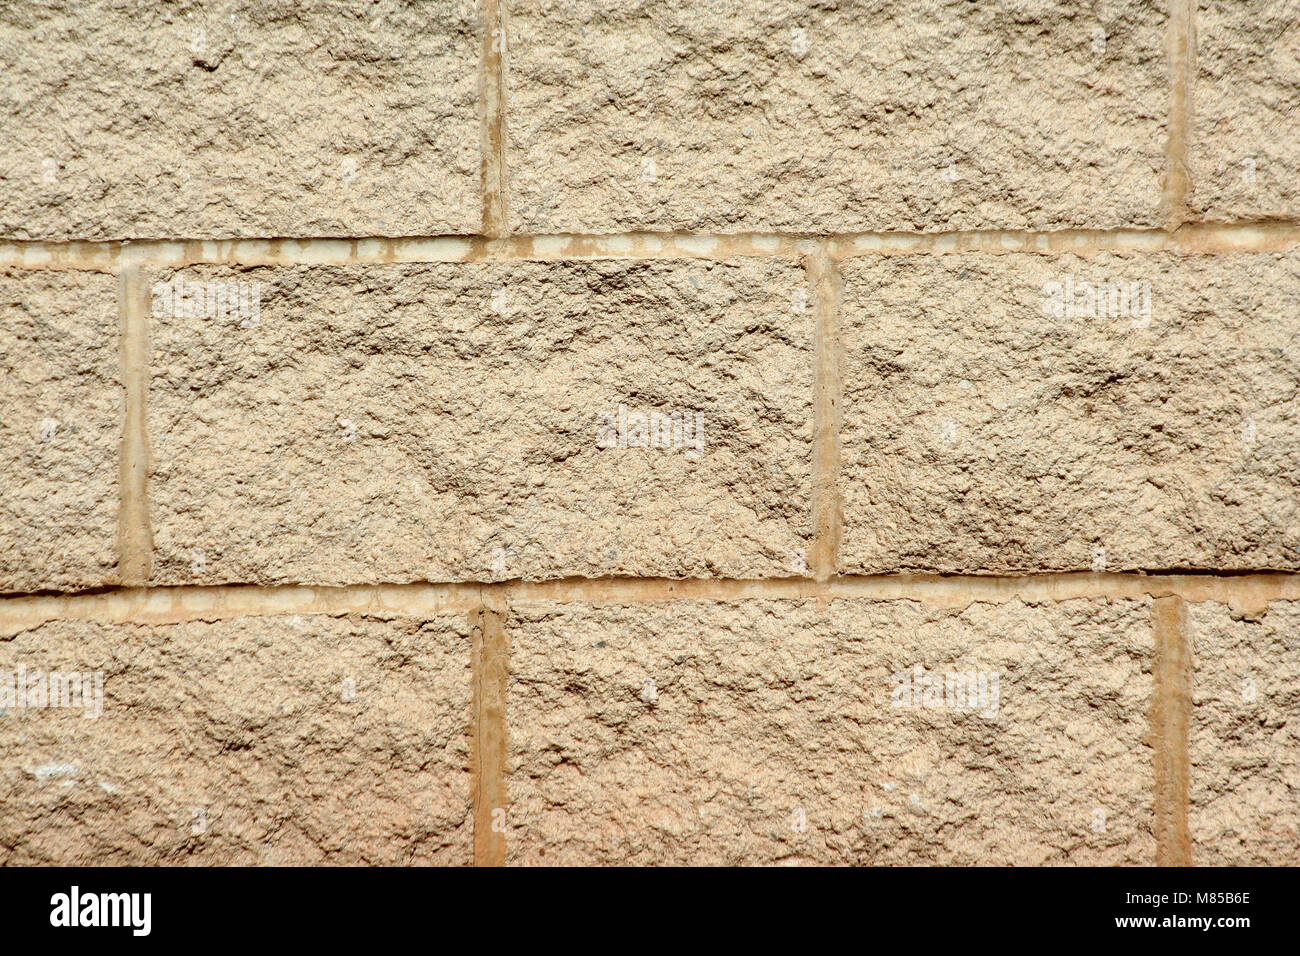 A Stone block wall background texture Stock Photo